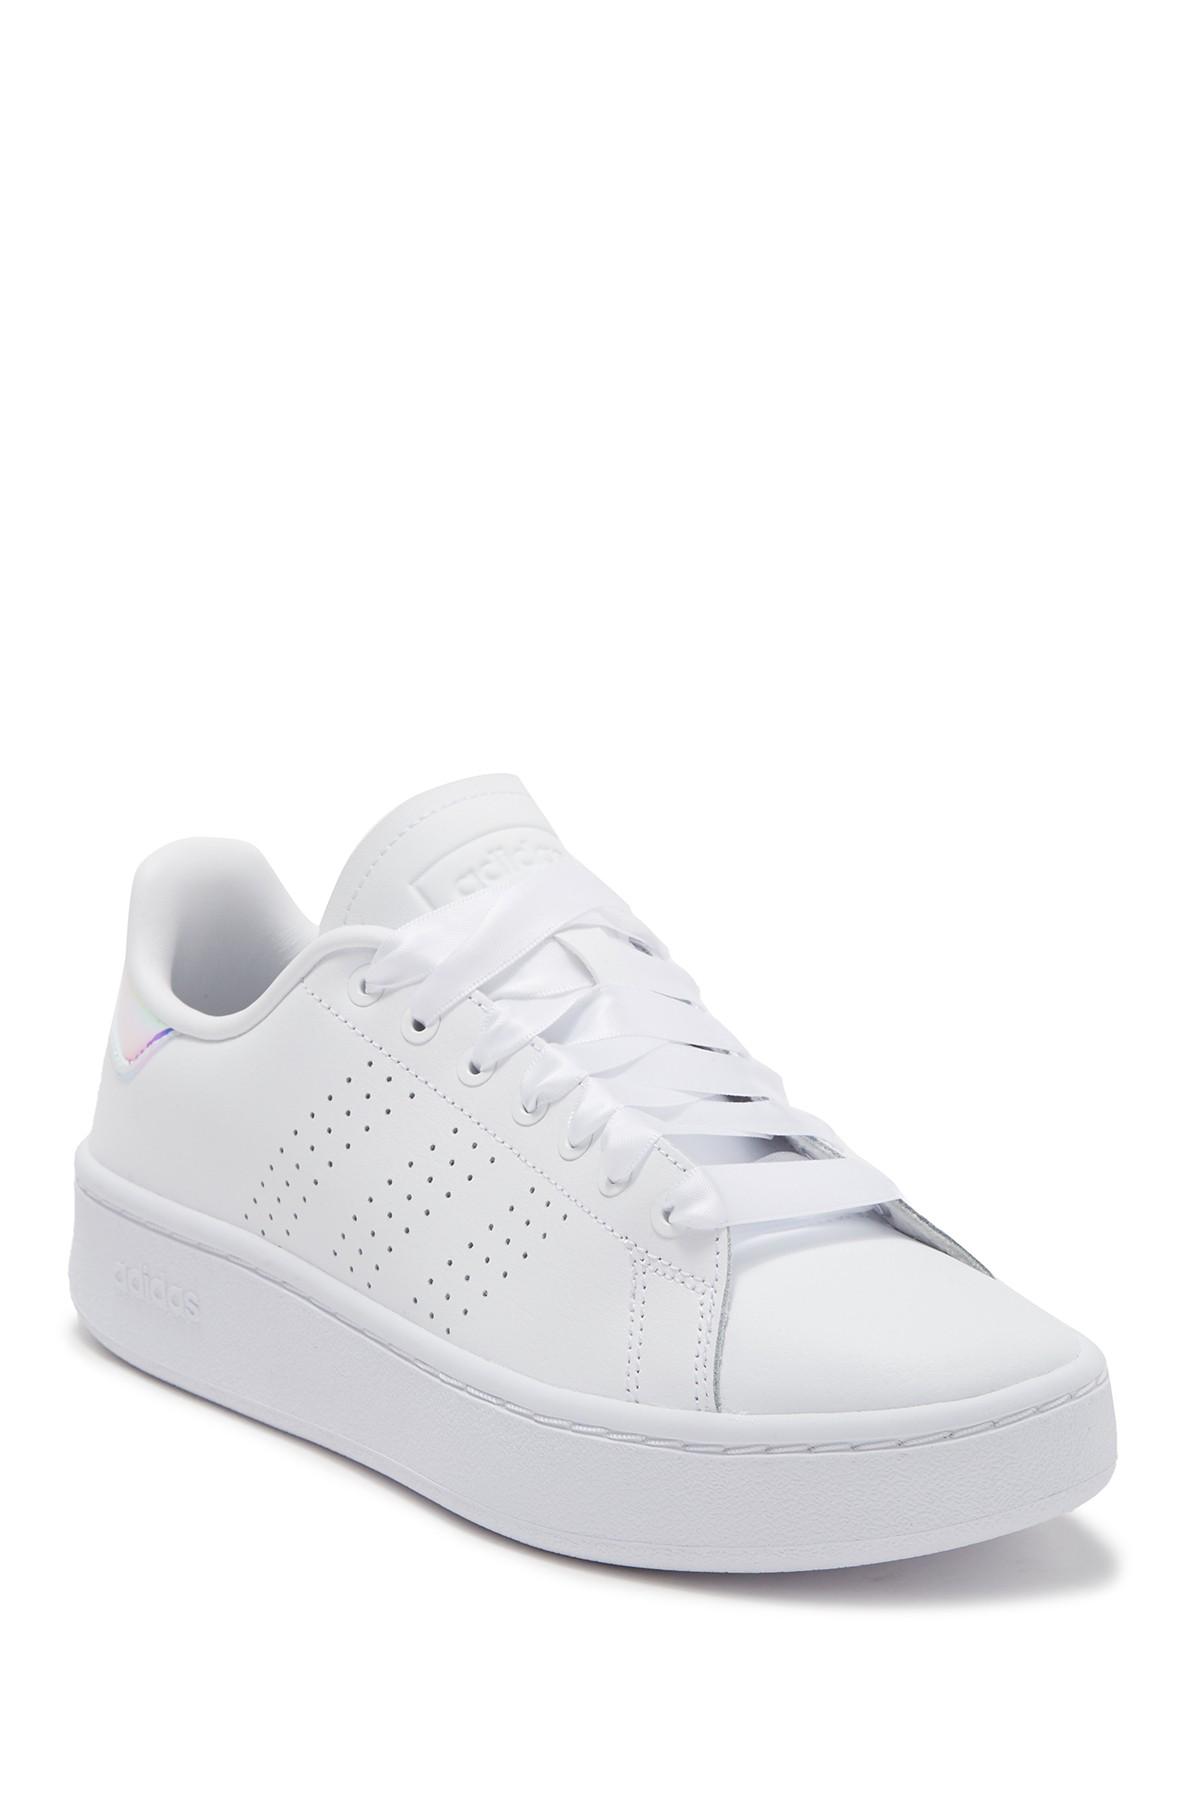 adidas Leather Advantage Bold Sneaker in White - Lyst